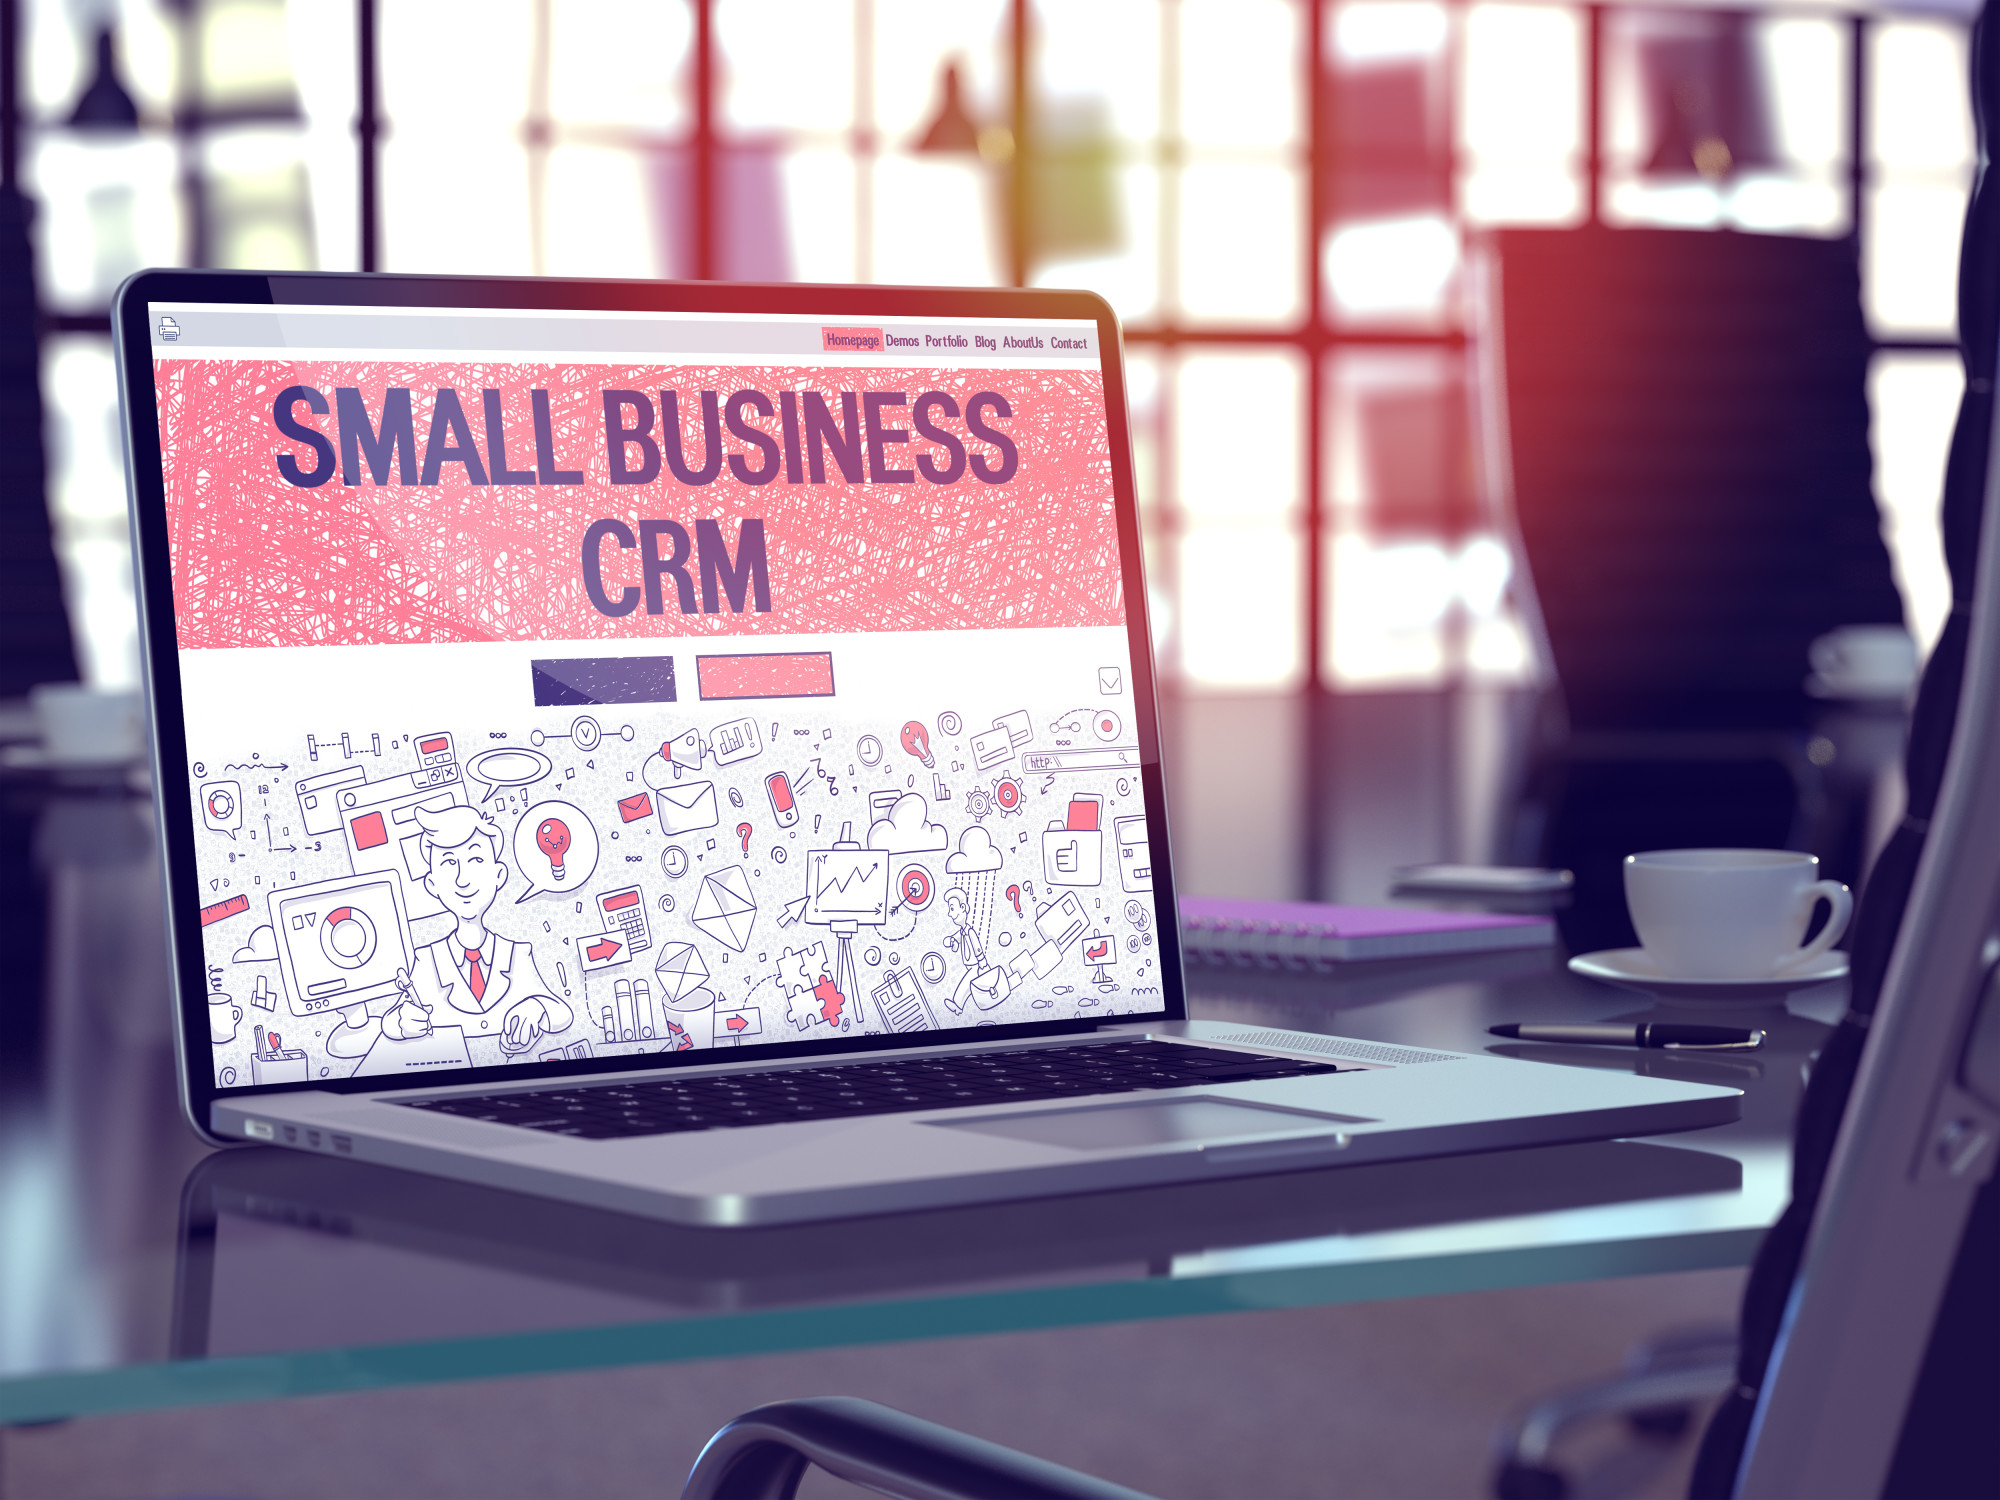 What To Know When Choosing CRM Software for Your Small Business